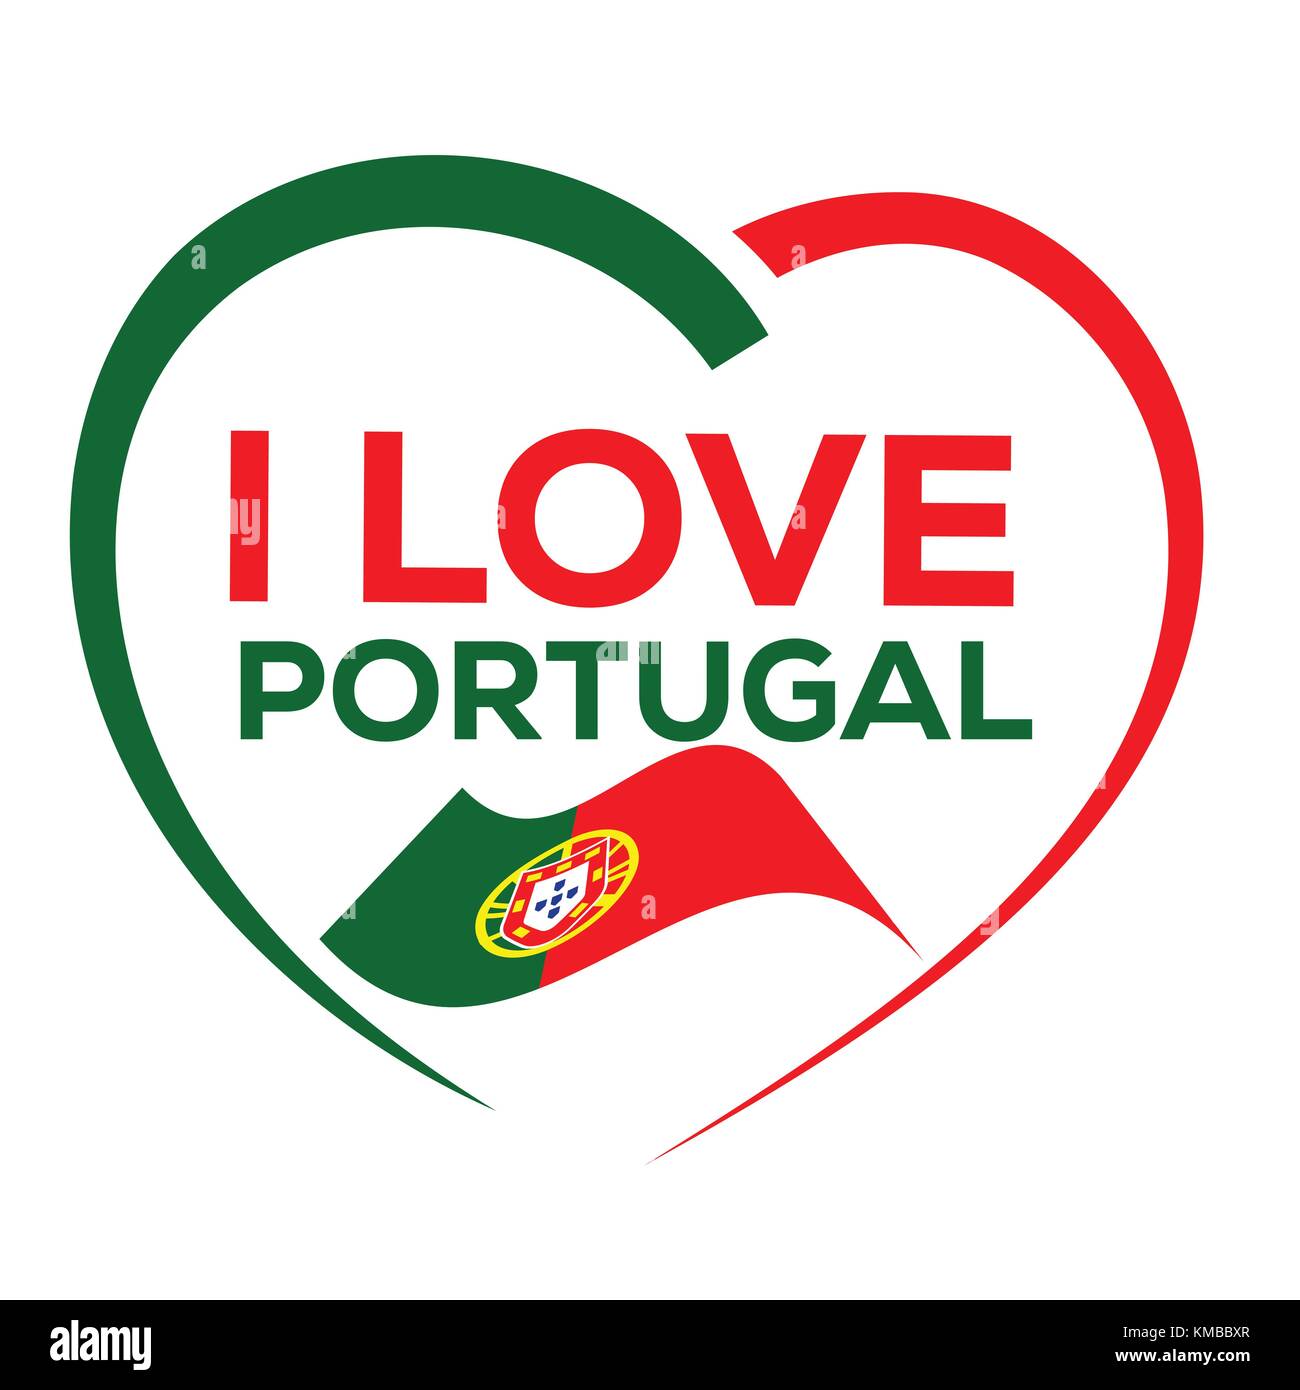 I love portugal with outline of heart and flag of portugal, icon design, isolated on white background. Stock Vector